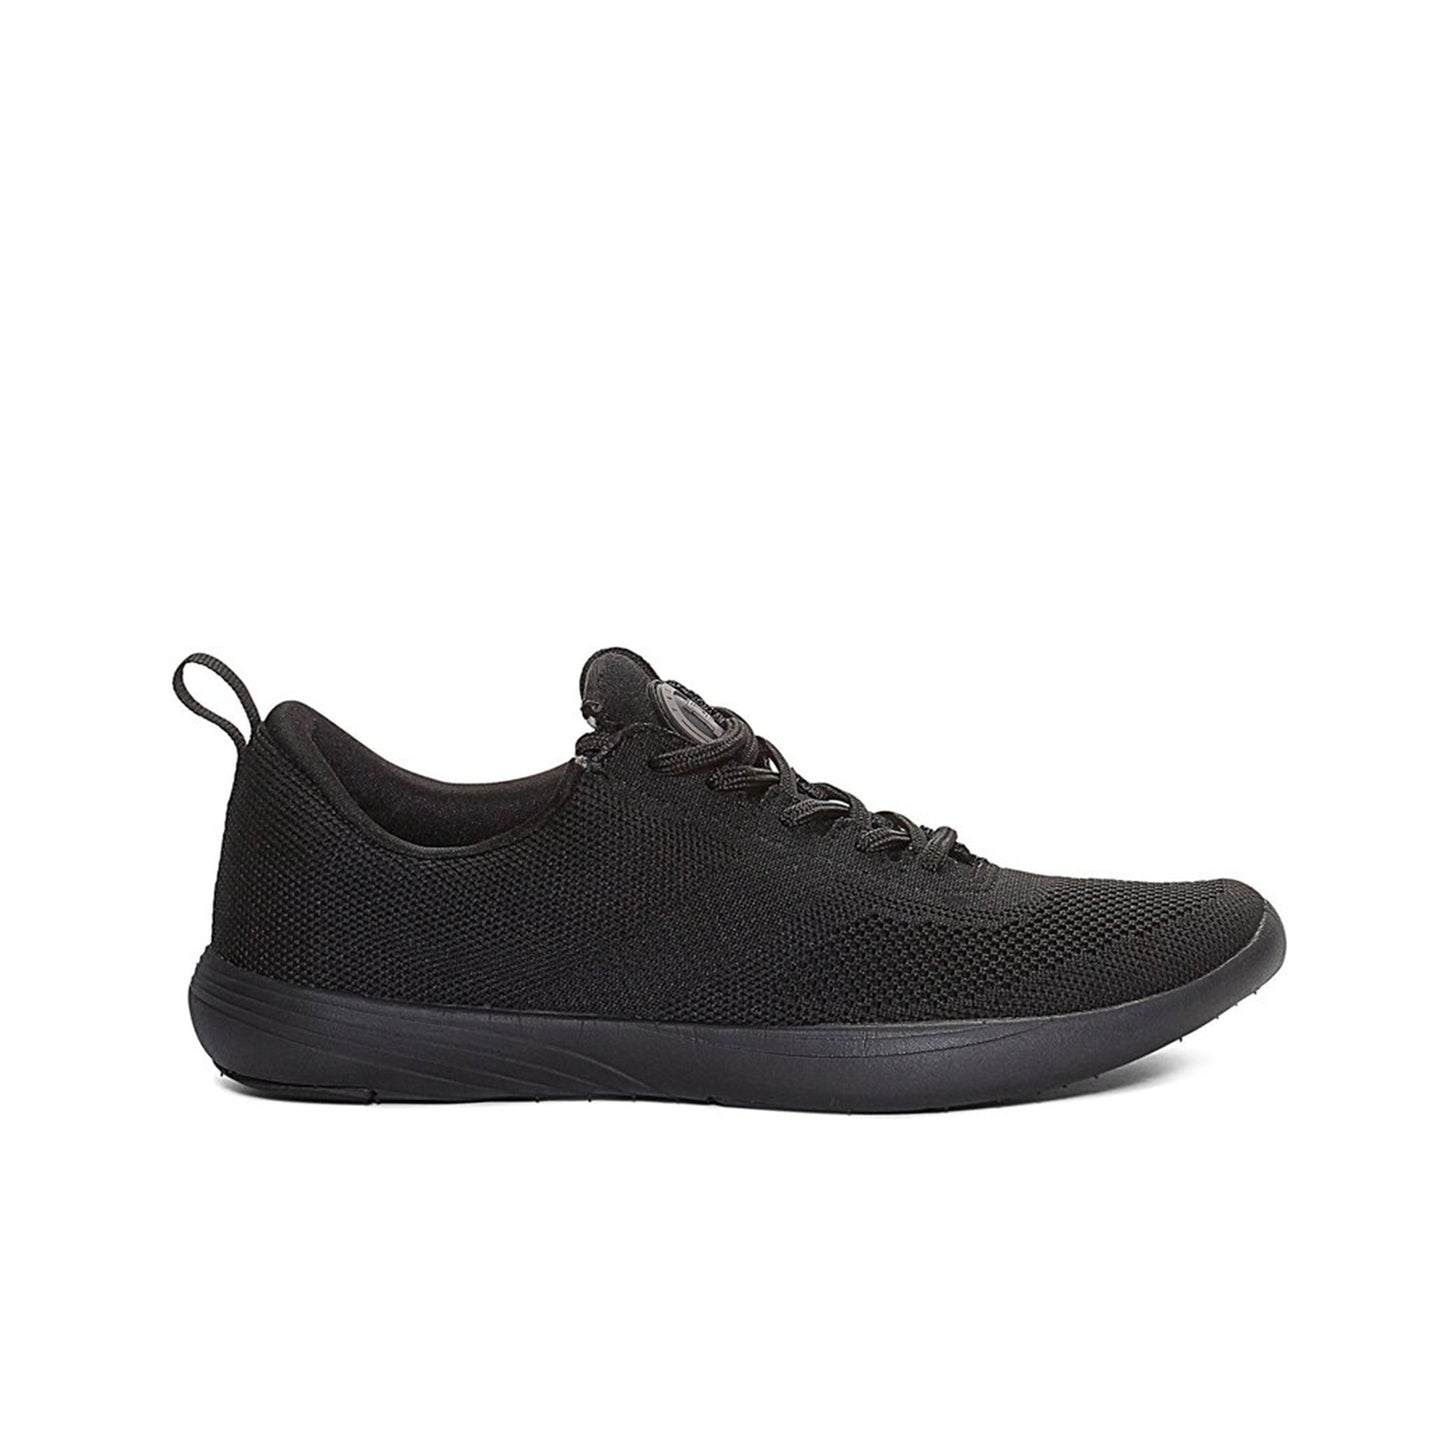 Pastry Studio TR2 Youth Sneaker in Black/Black lateral view